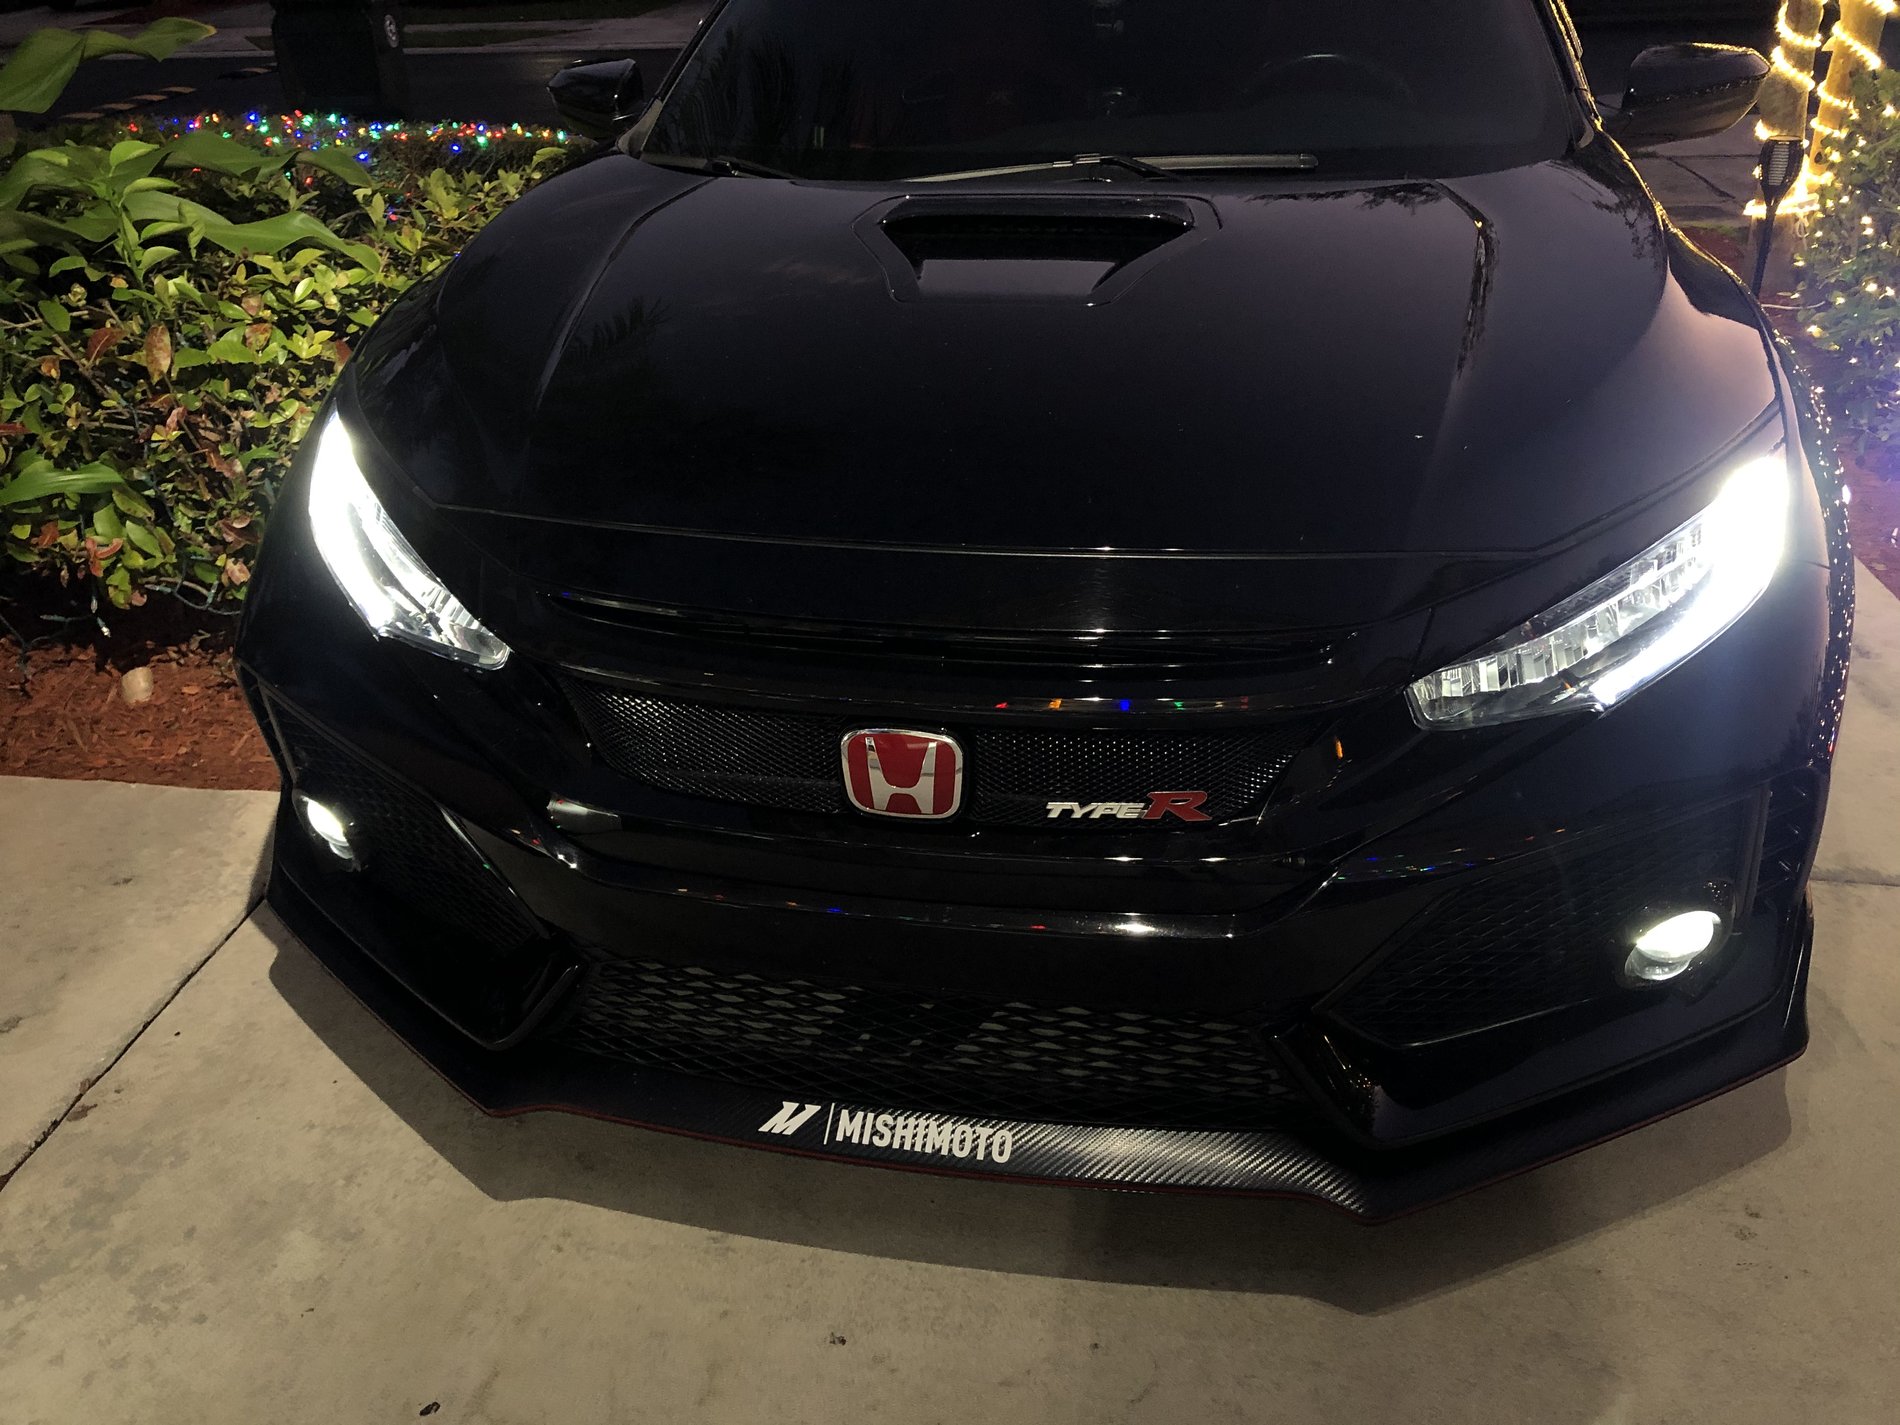 Honda Civic 10th gen Ebay Grill Link Here - Beat Overheating or Just for Looks 54AD933C-E7D9-44B8-97D1-DF0DE015CD57